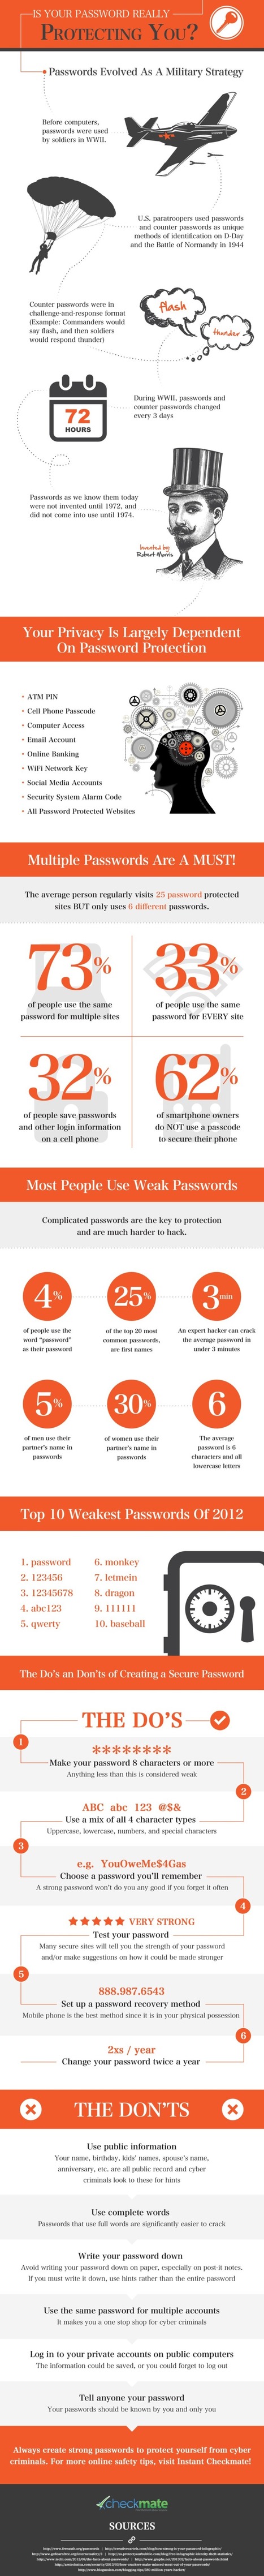 Is Your Password Really Protecting You? [INFOGRAPHIC] | 21st Century Learning and Teaching | Scoop.it